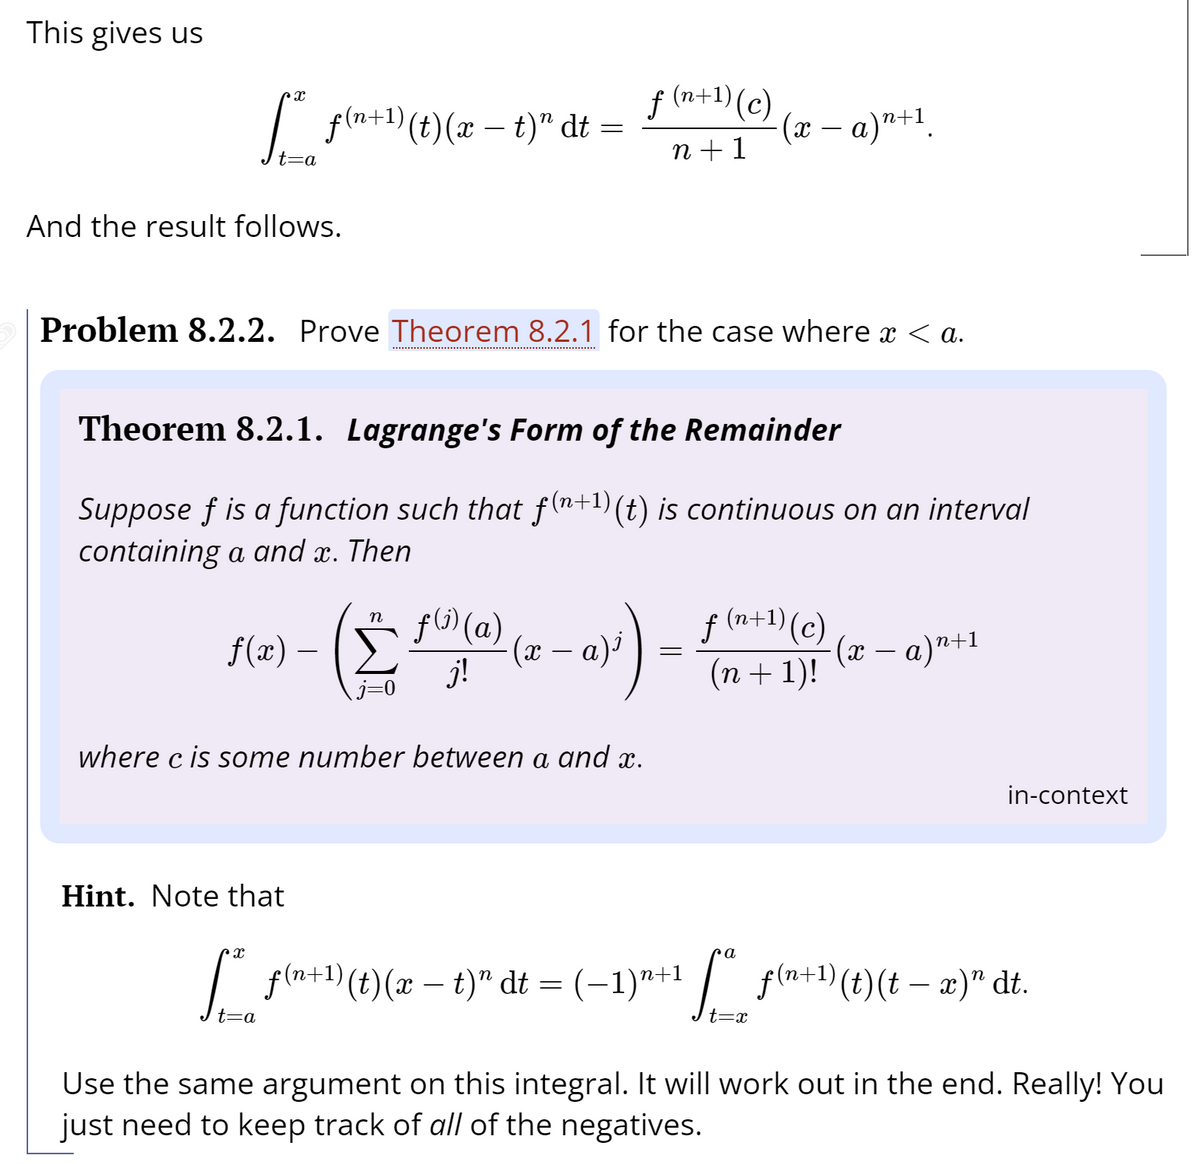 This gives us
f (n+1) (c)
I pla+)(t)(x – t)" dt
(х — а)"+1.
n +1
And the result follows.
Problem 8.2.2. Prove Theorem 8.2.1 for the case where x < a.
Theorem 8.2.1. Lagrange's Form of the Remainder
Suppose f is a function such that f(n+1)(t) is continuous on an interval
containing a and x. Then
f(1) (a)
f (n+1) (c)
n
f(x) –
a)'
(x – a)"+1
-
j!
(n + 1)!
where c is some number between a and x.
in-context
Hint. Note that
I fla+1) (t)(x – t)" dt = (-1)"+1 / f(a+)(t)(t – æ)" dt.
f(n+1) (t)(t – x)" dt.
t=a
t=x
Use the same argument on this integral. It will work out in the end. Really! You
just need to keep track of all of the negatives.
